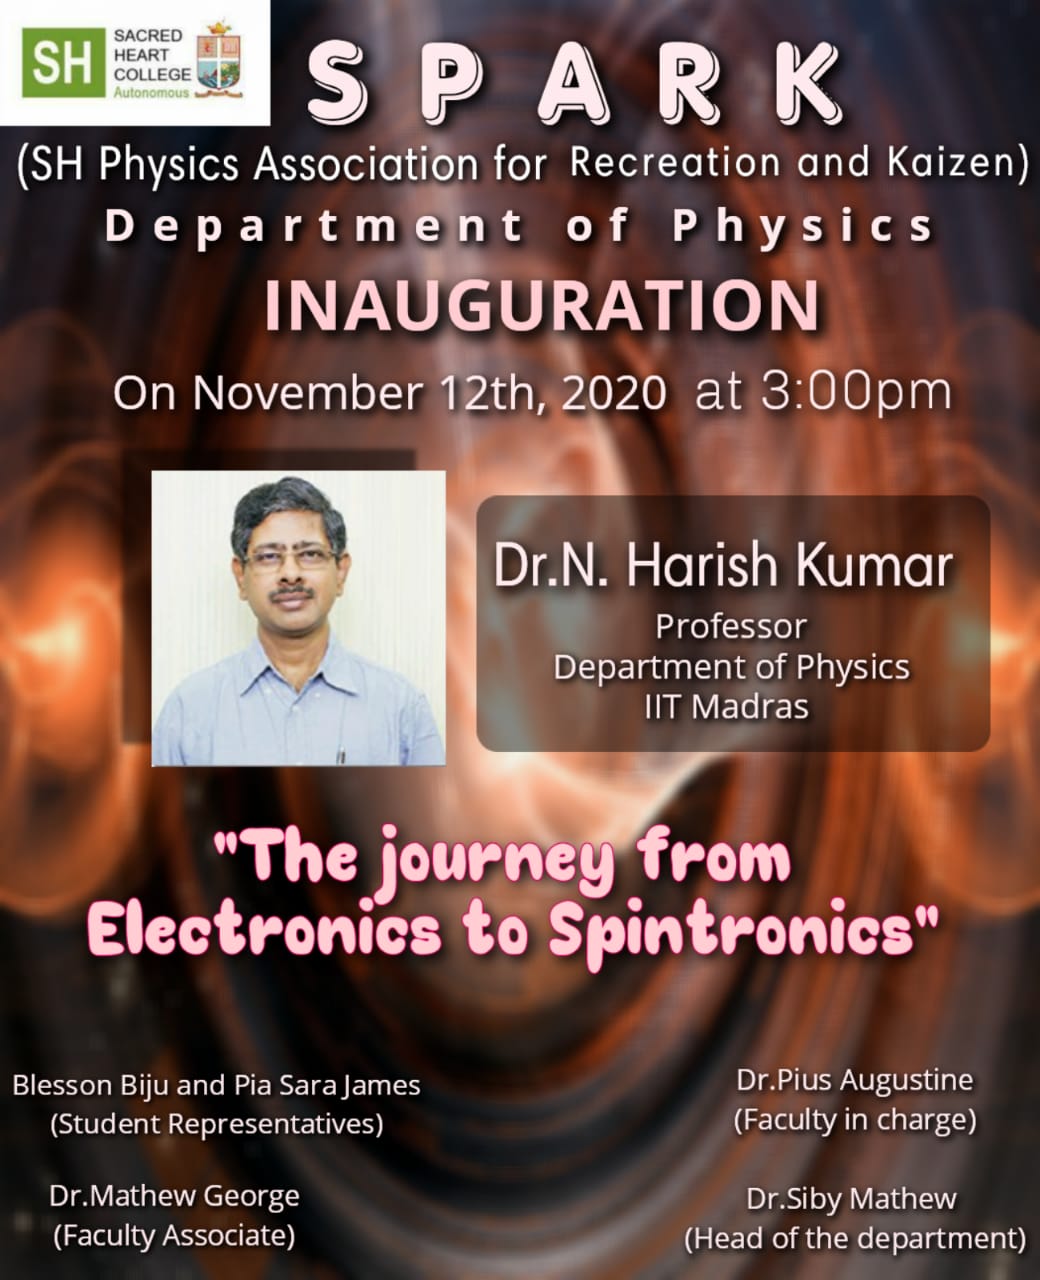 The journey from Electronics to Spintronics